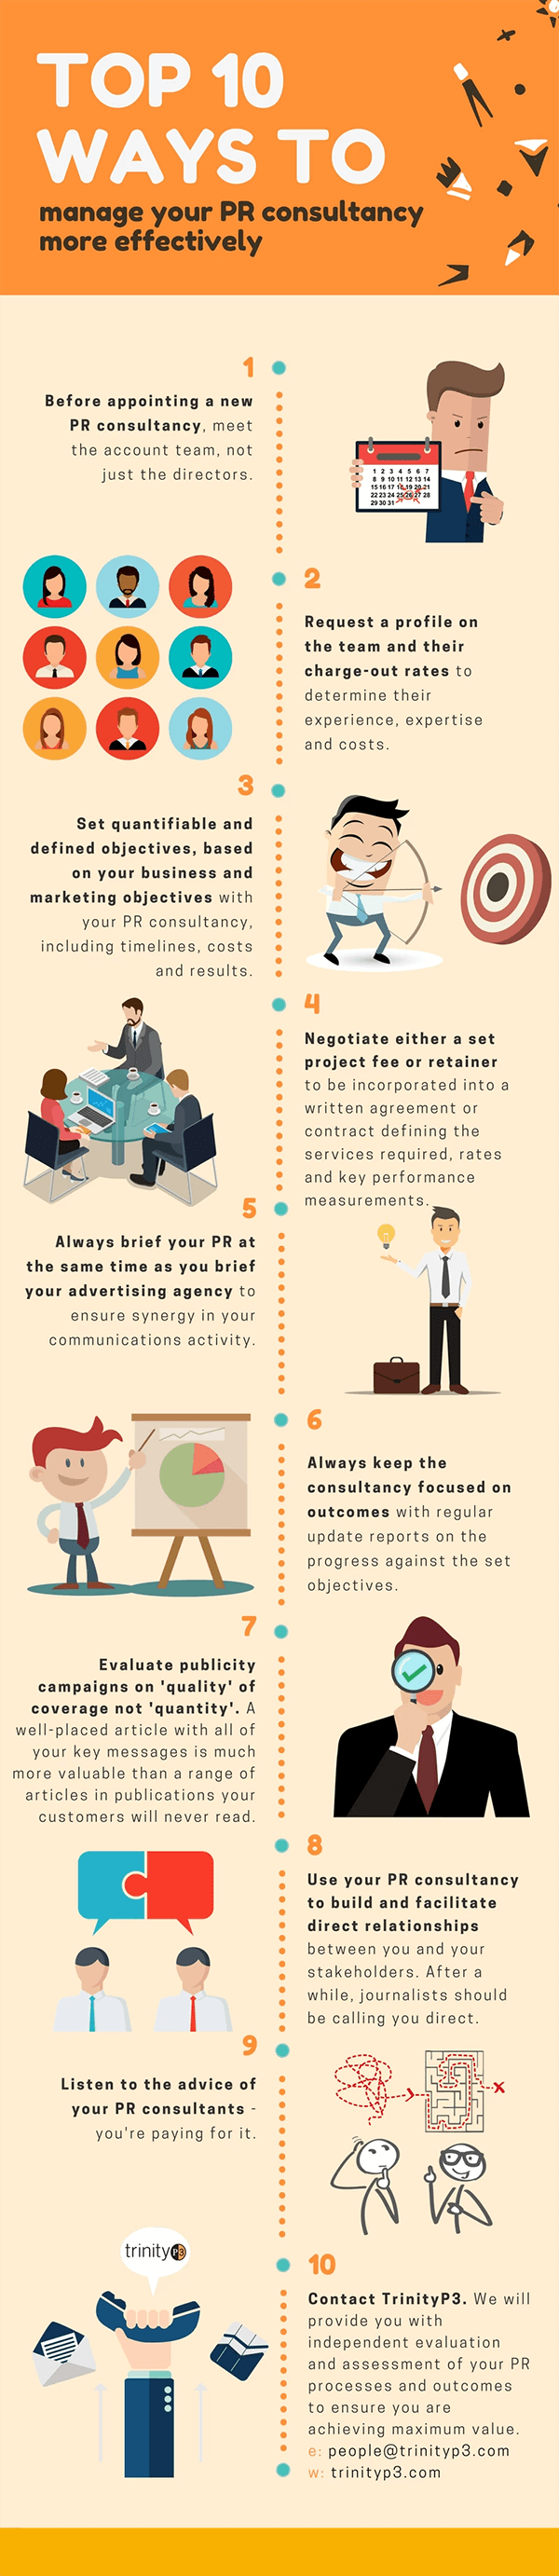 Top 10 ways to manage your PR consultancy more effectively - Infographic